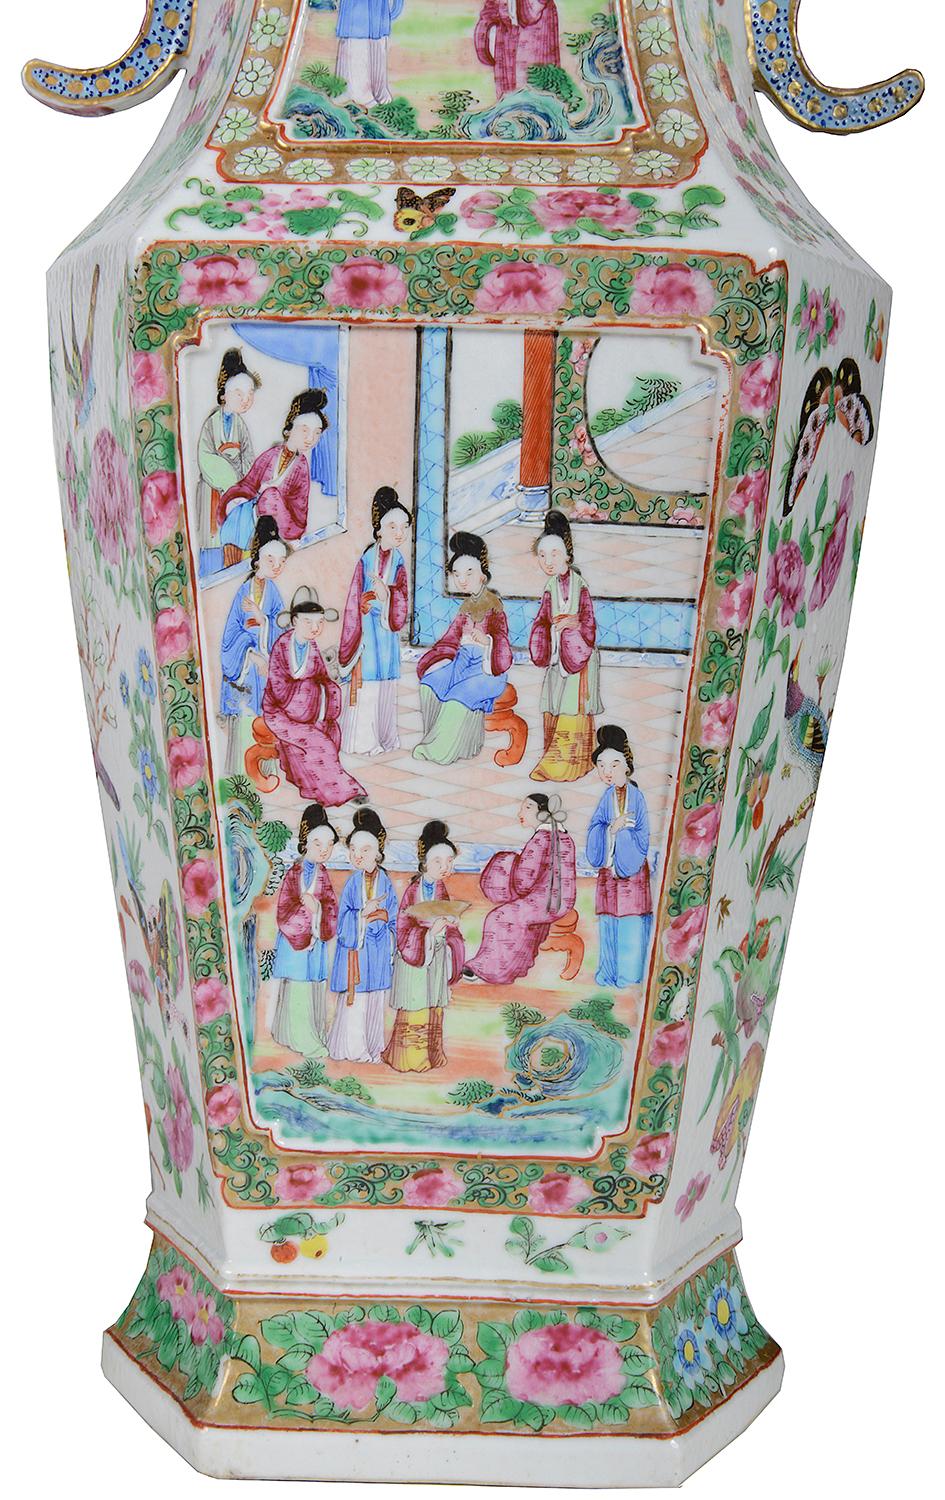 A very good quality pair of 19th century Chinese Cantonese / rose Medallion vases, each having the classical green ground with pink floral decoration, pierced blue handles to either side, inset hand painted panels depicting interior scenes with